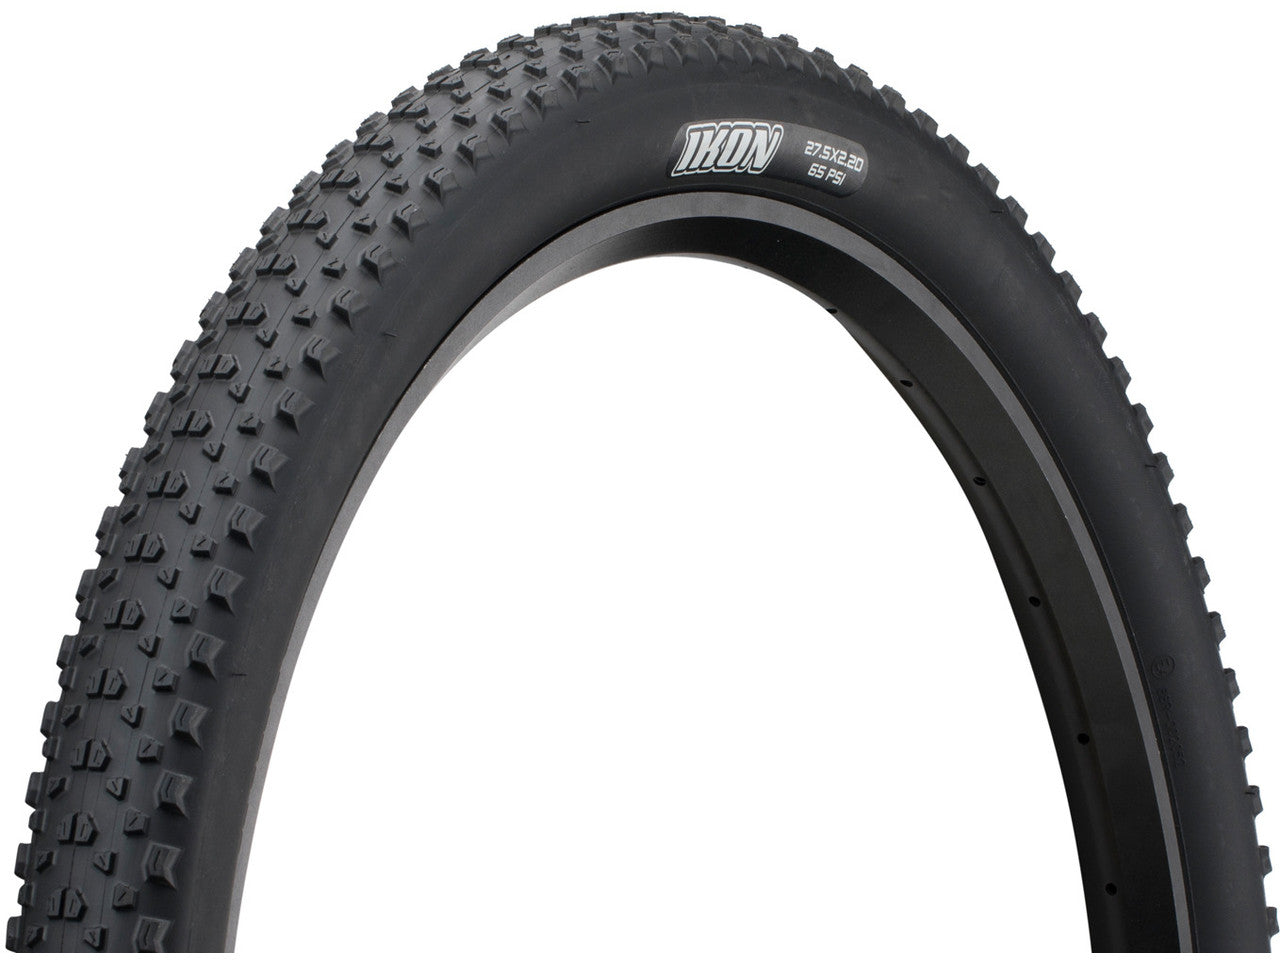 Maxxis Ikon 27.5" Wired Tire (Black)